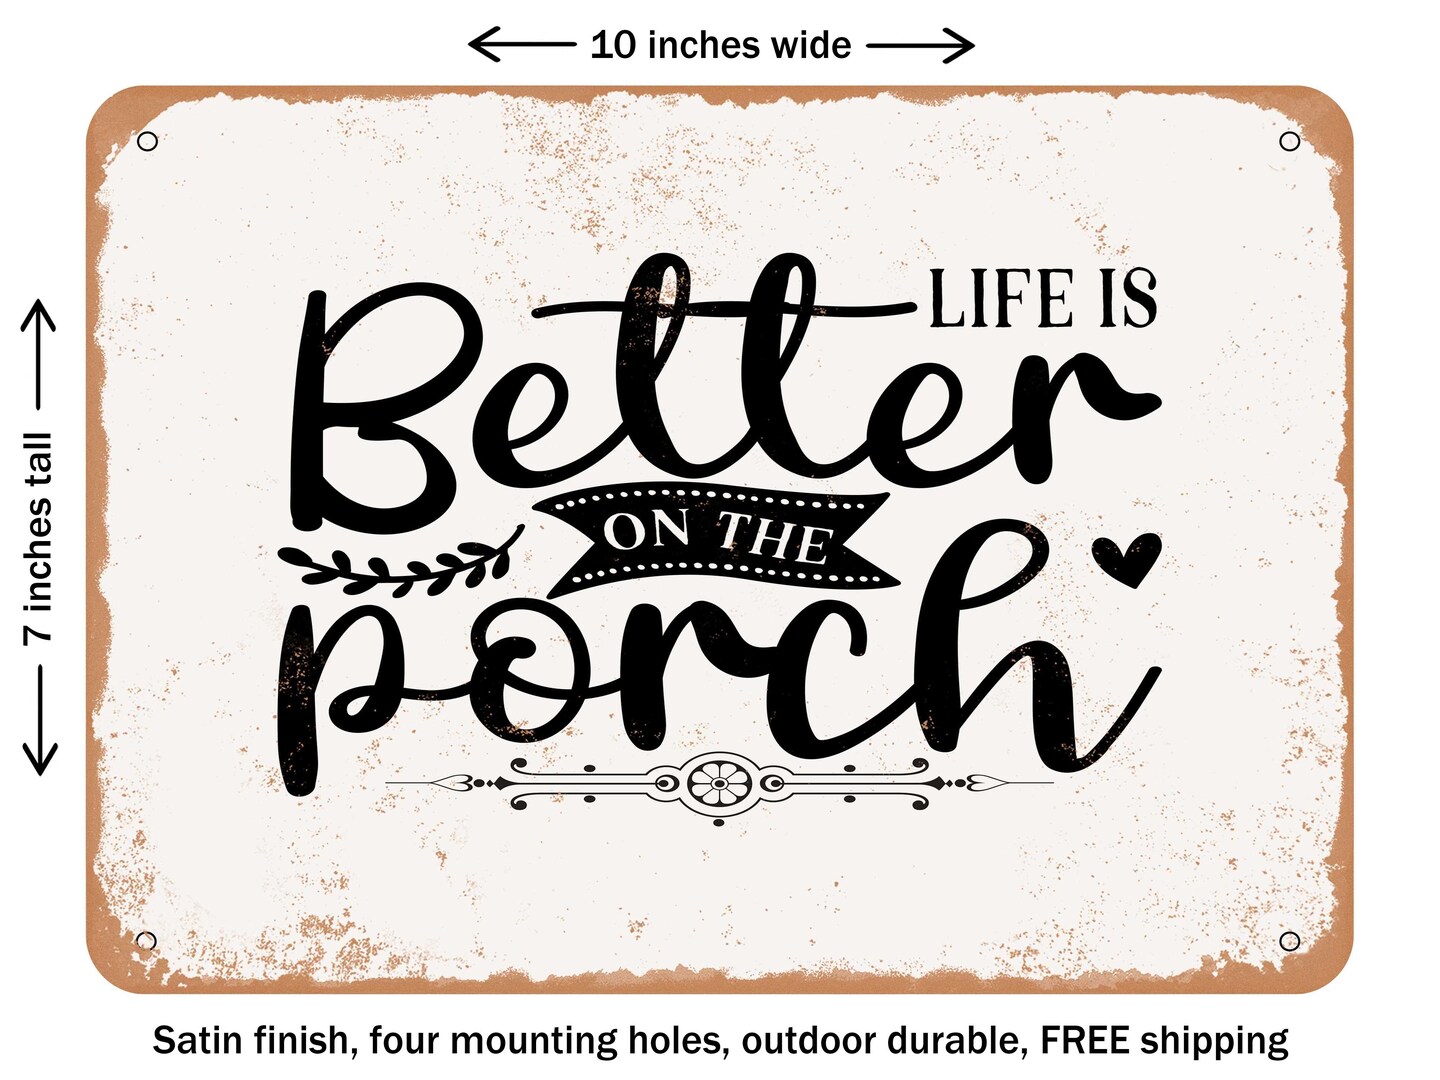 DECORATIVE METAL SIGN - Life is Better On the Porch - Vintage Rusty Look